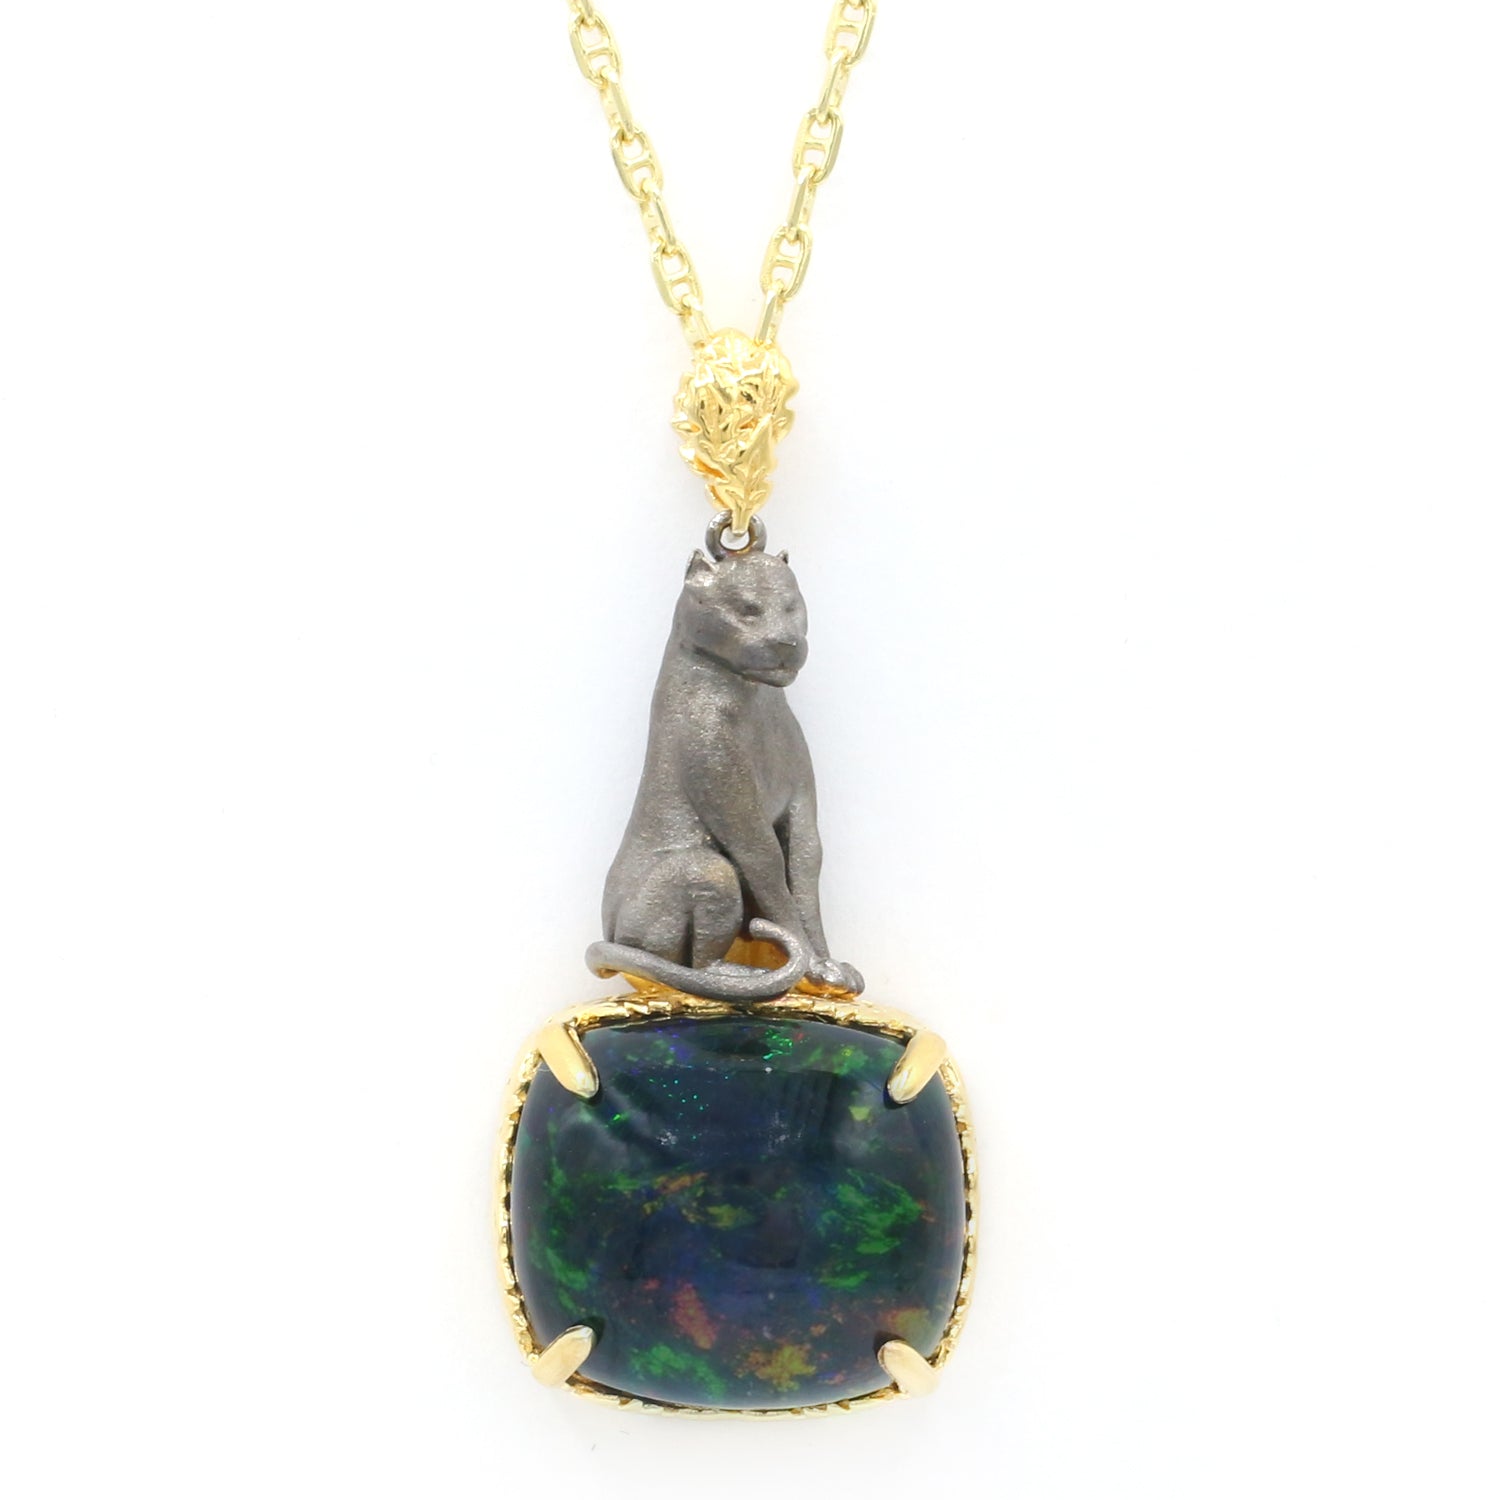 Limited Edition Gems en Vogue Luxe, One-of-a-Kind 13.13ctw Black Ethiopian Opal Panther Pendant